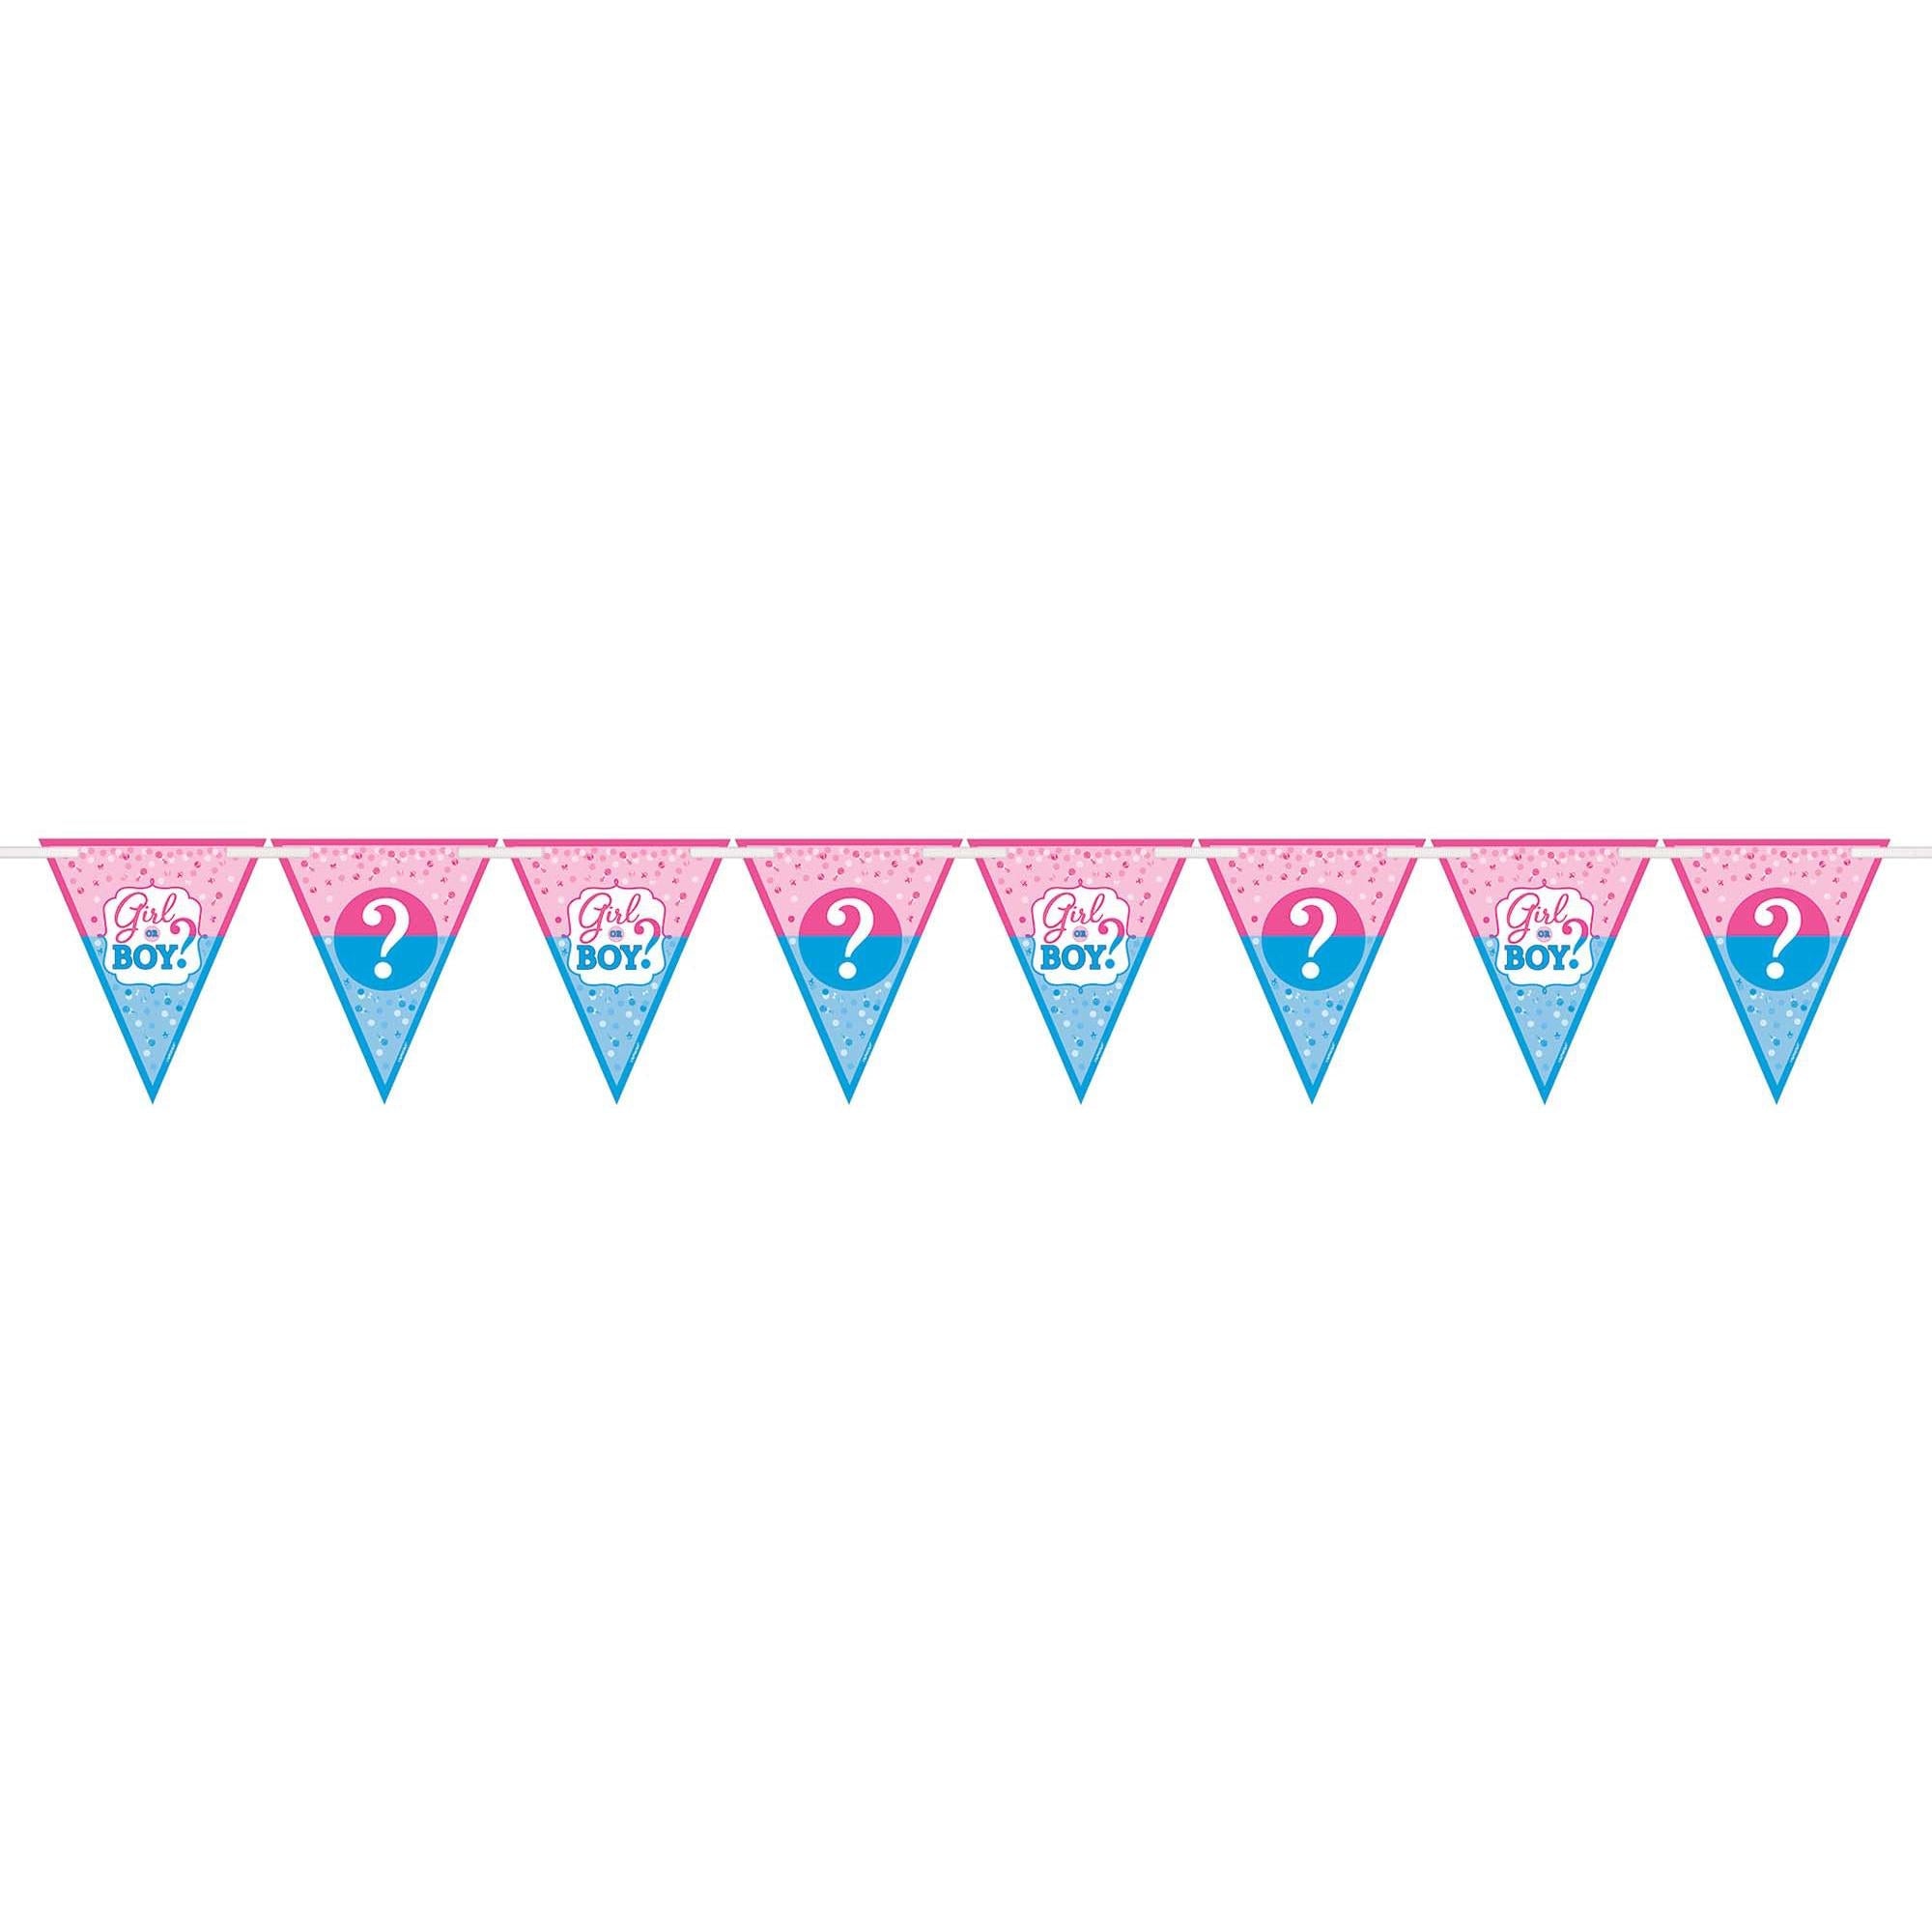 Girl Or Boy? Paper Pennant Banner 15ft Decorations - Party Centre